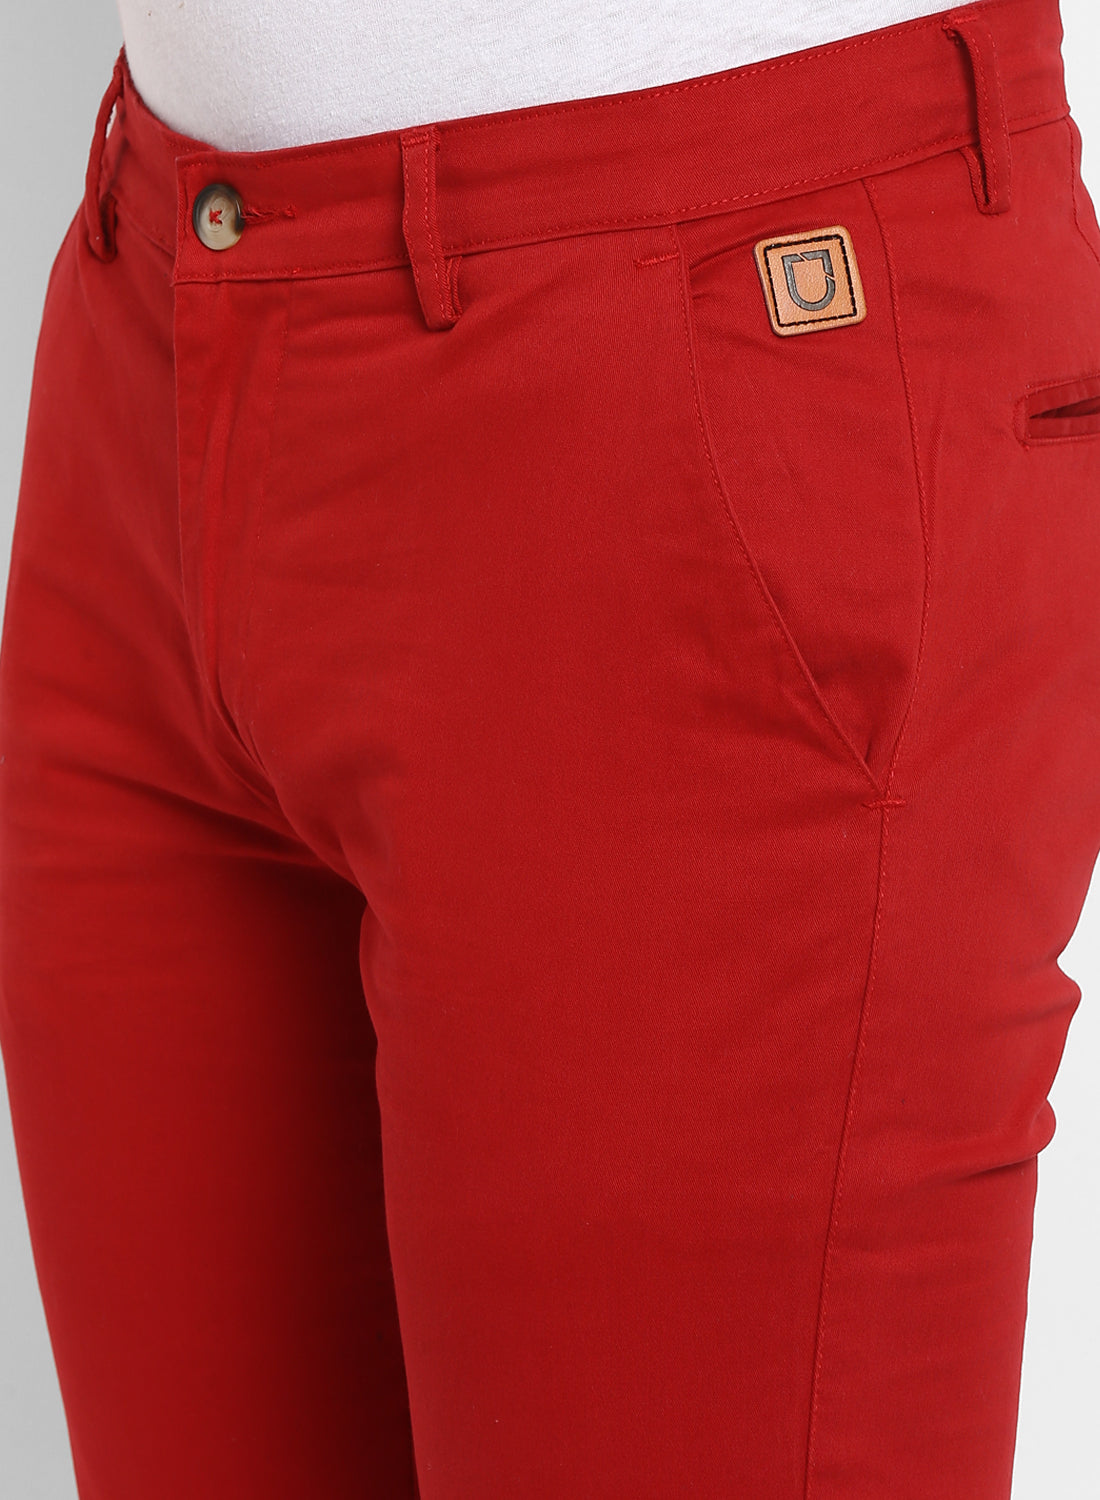 Men's Red Cotton Slim Fit Casual Chinos Trousers Stretch